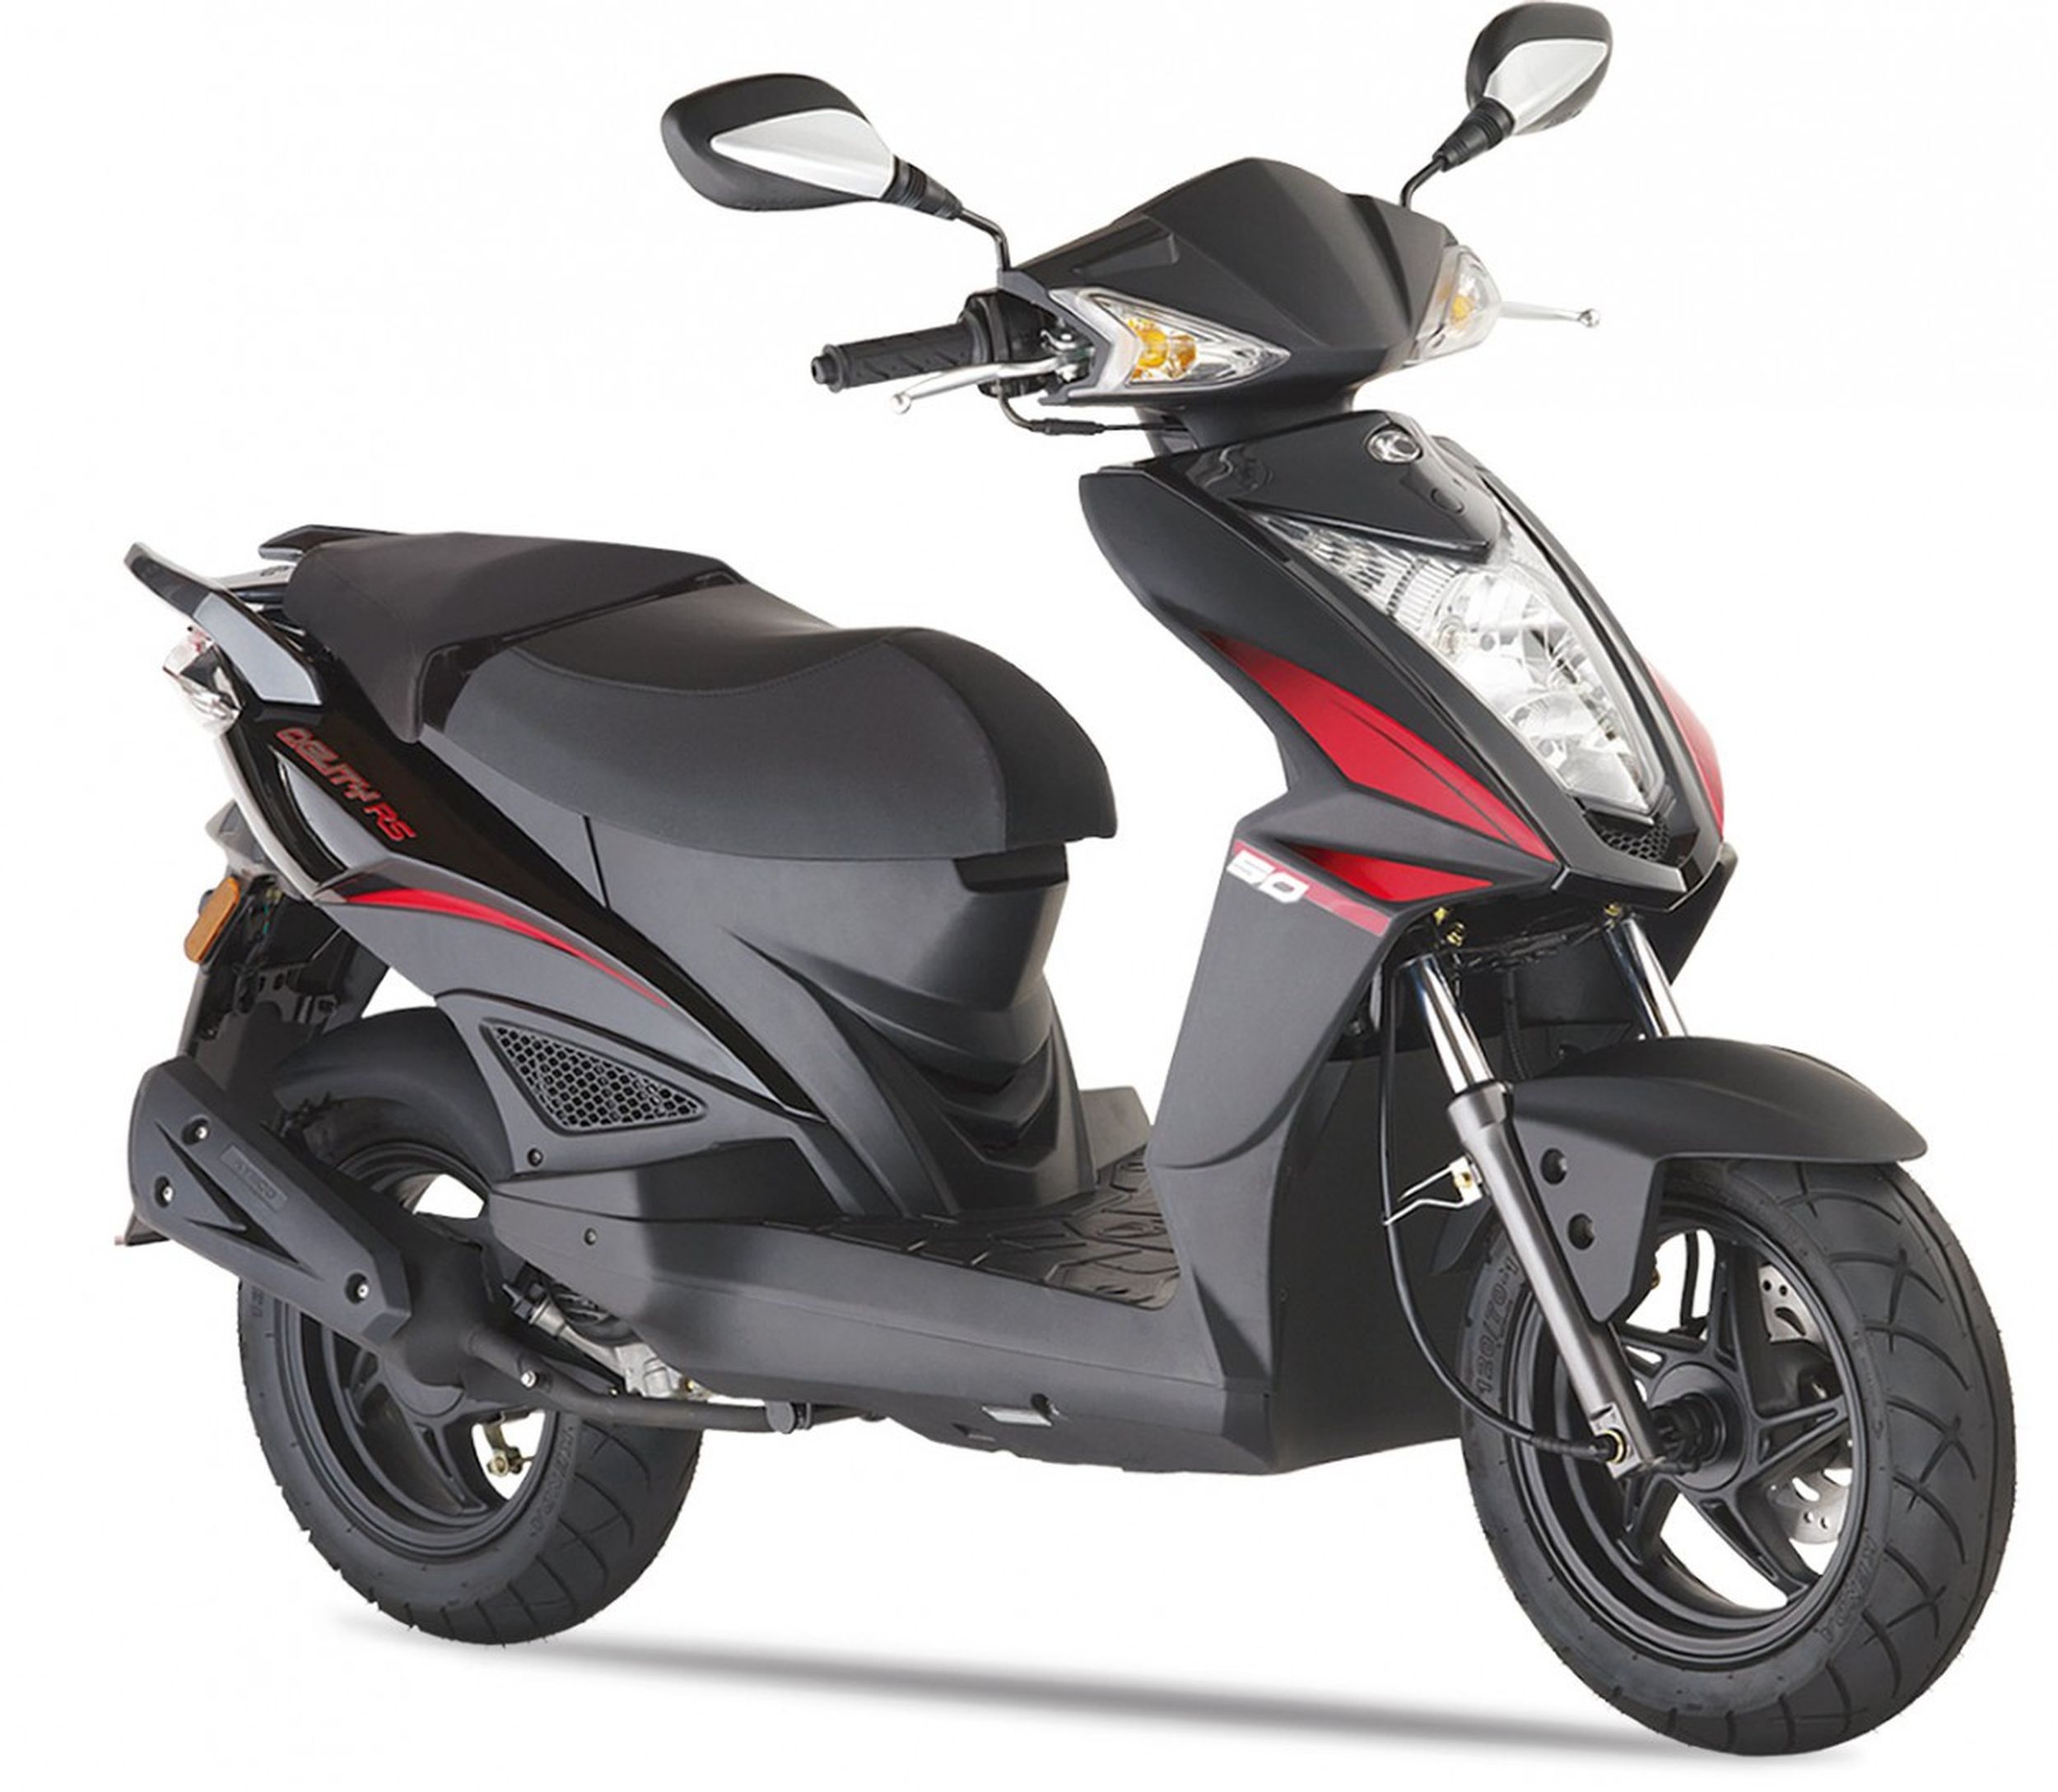 2014 Kymco Agility RS Naked 125 Review - Top Speed